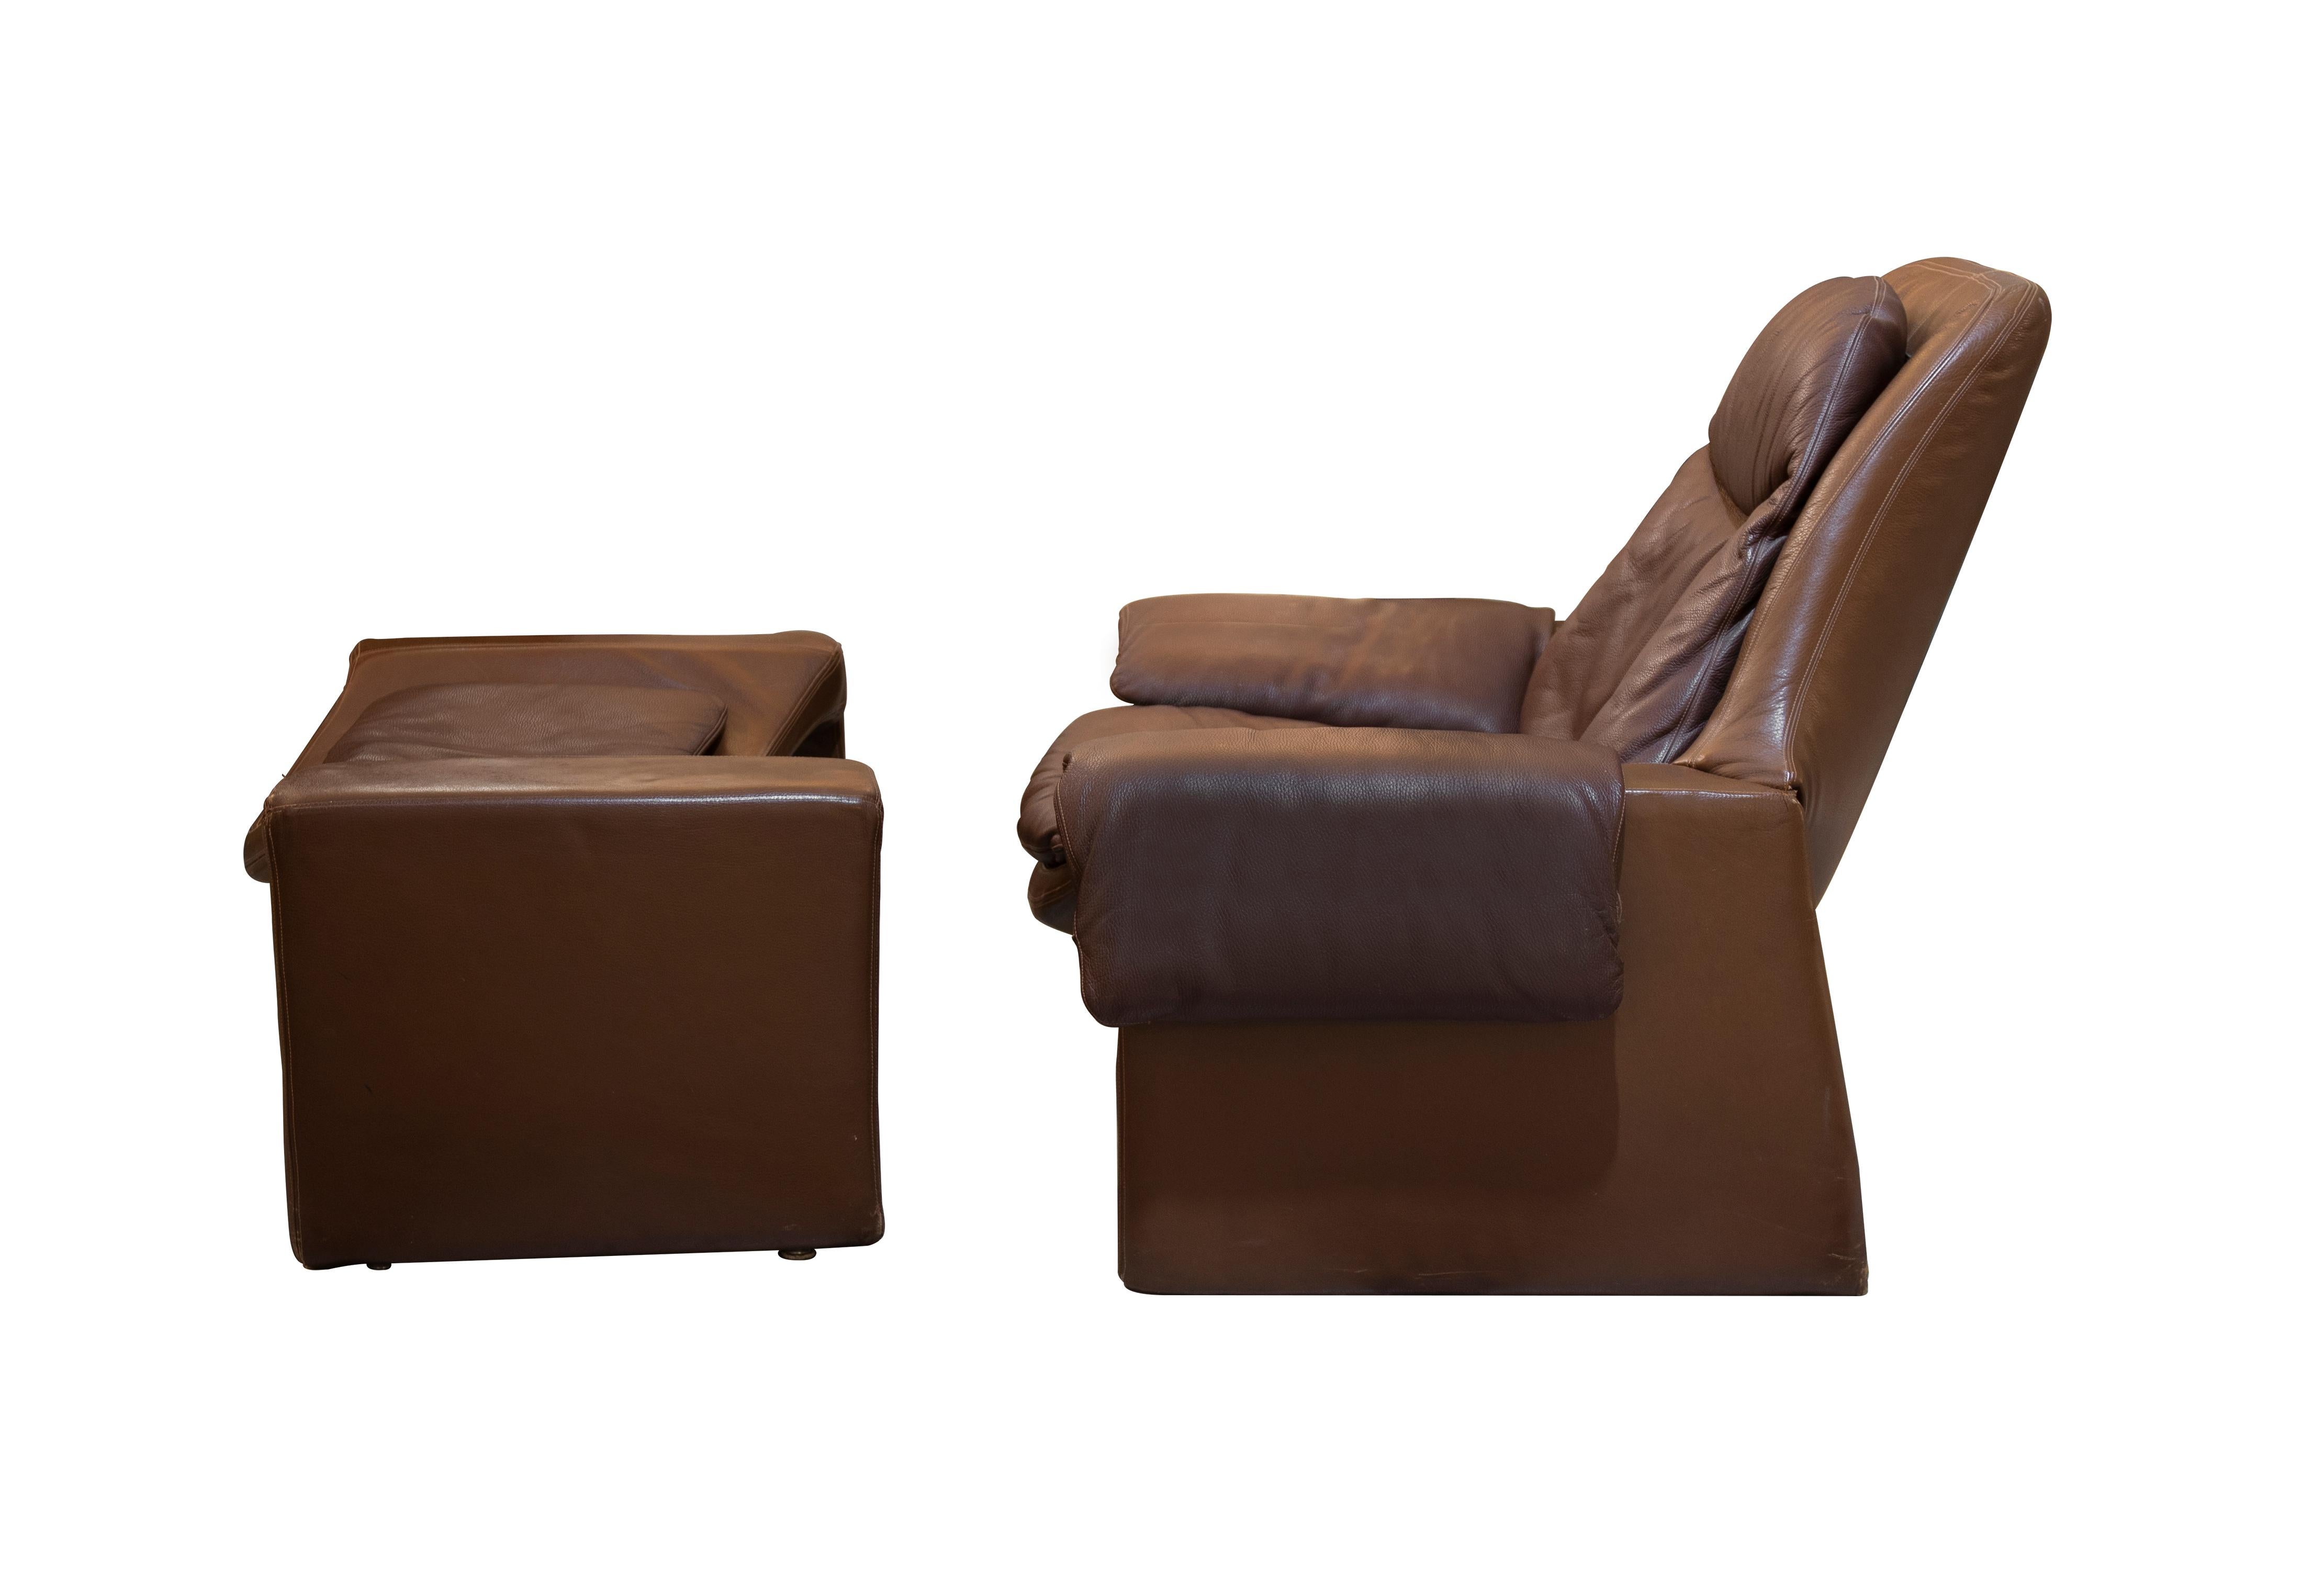 Vintage P60 Armchair and Footstool is a sophisticated piece of design furniture realized in the 1960s by Vittorio Introini (b.1935).

Created for Saporiti, made in Italy.

Wood and brown leather.

Very good conditions. 

This model P60